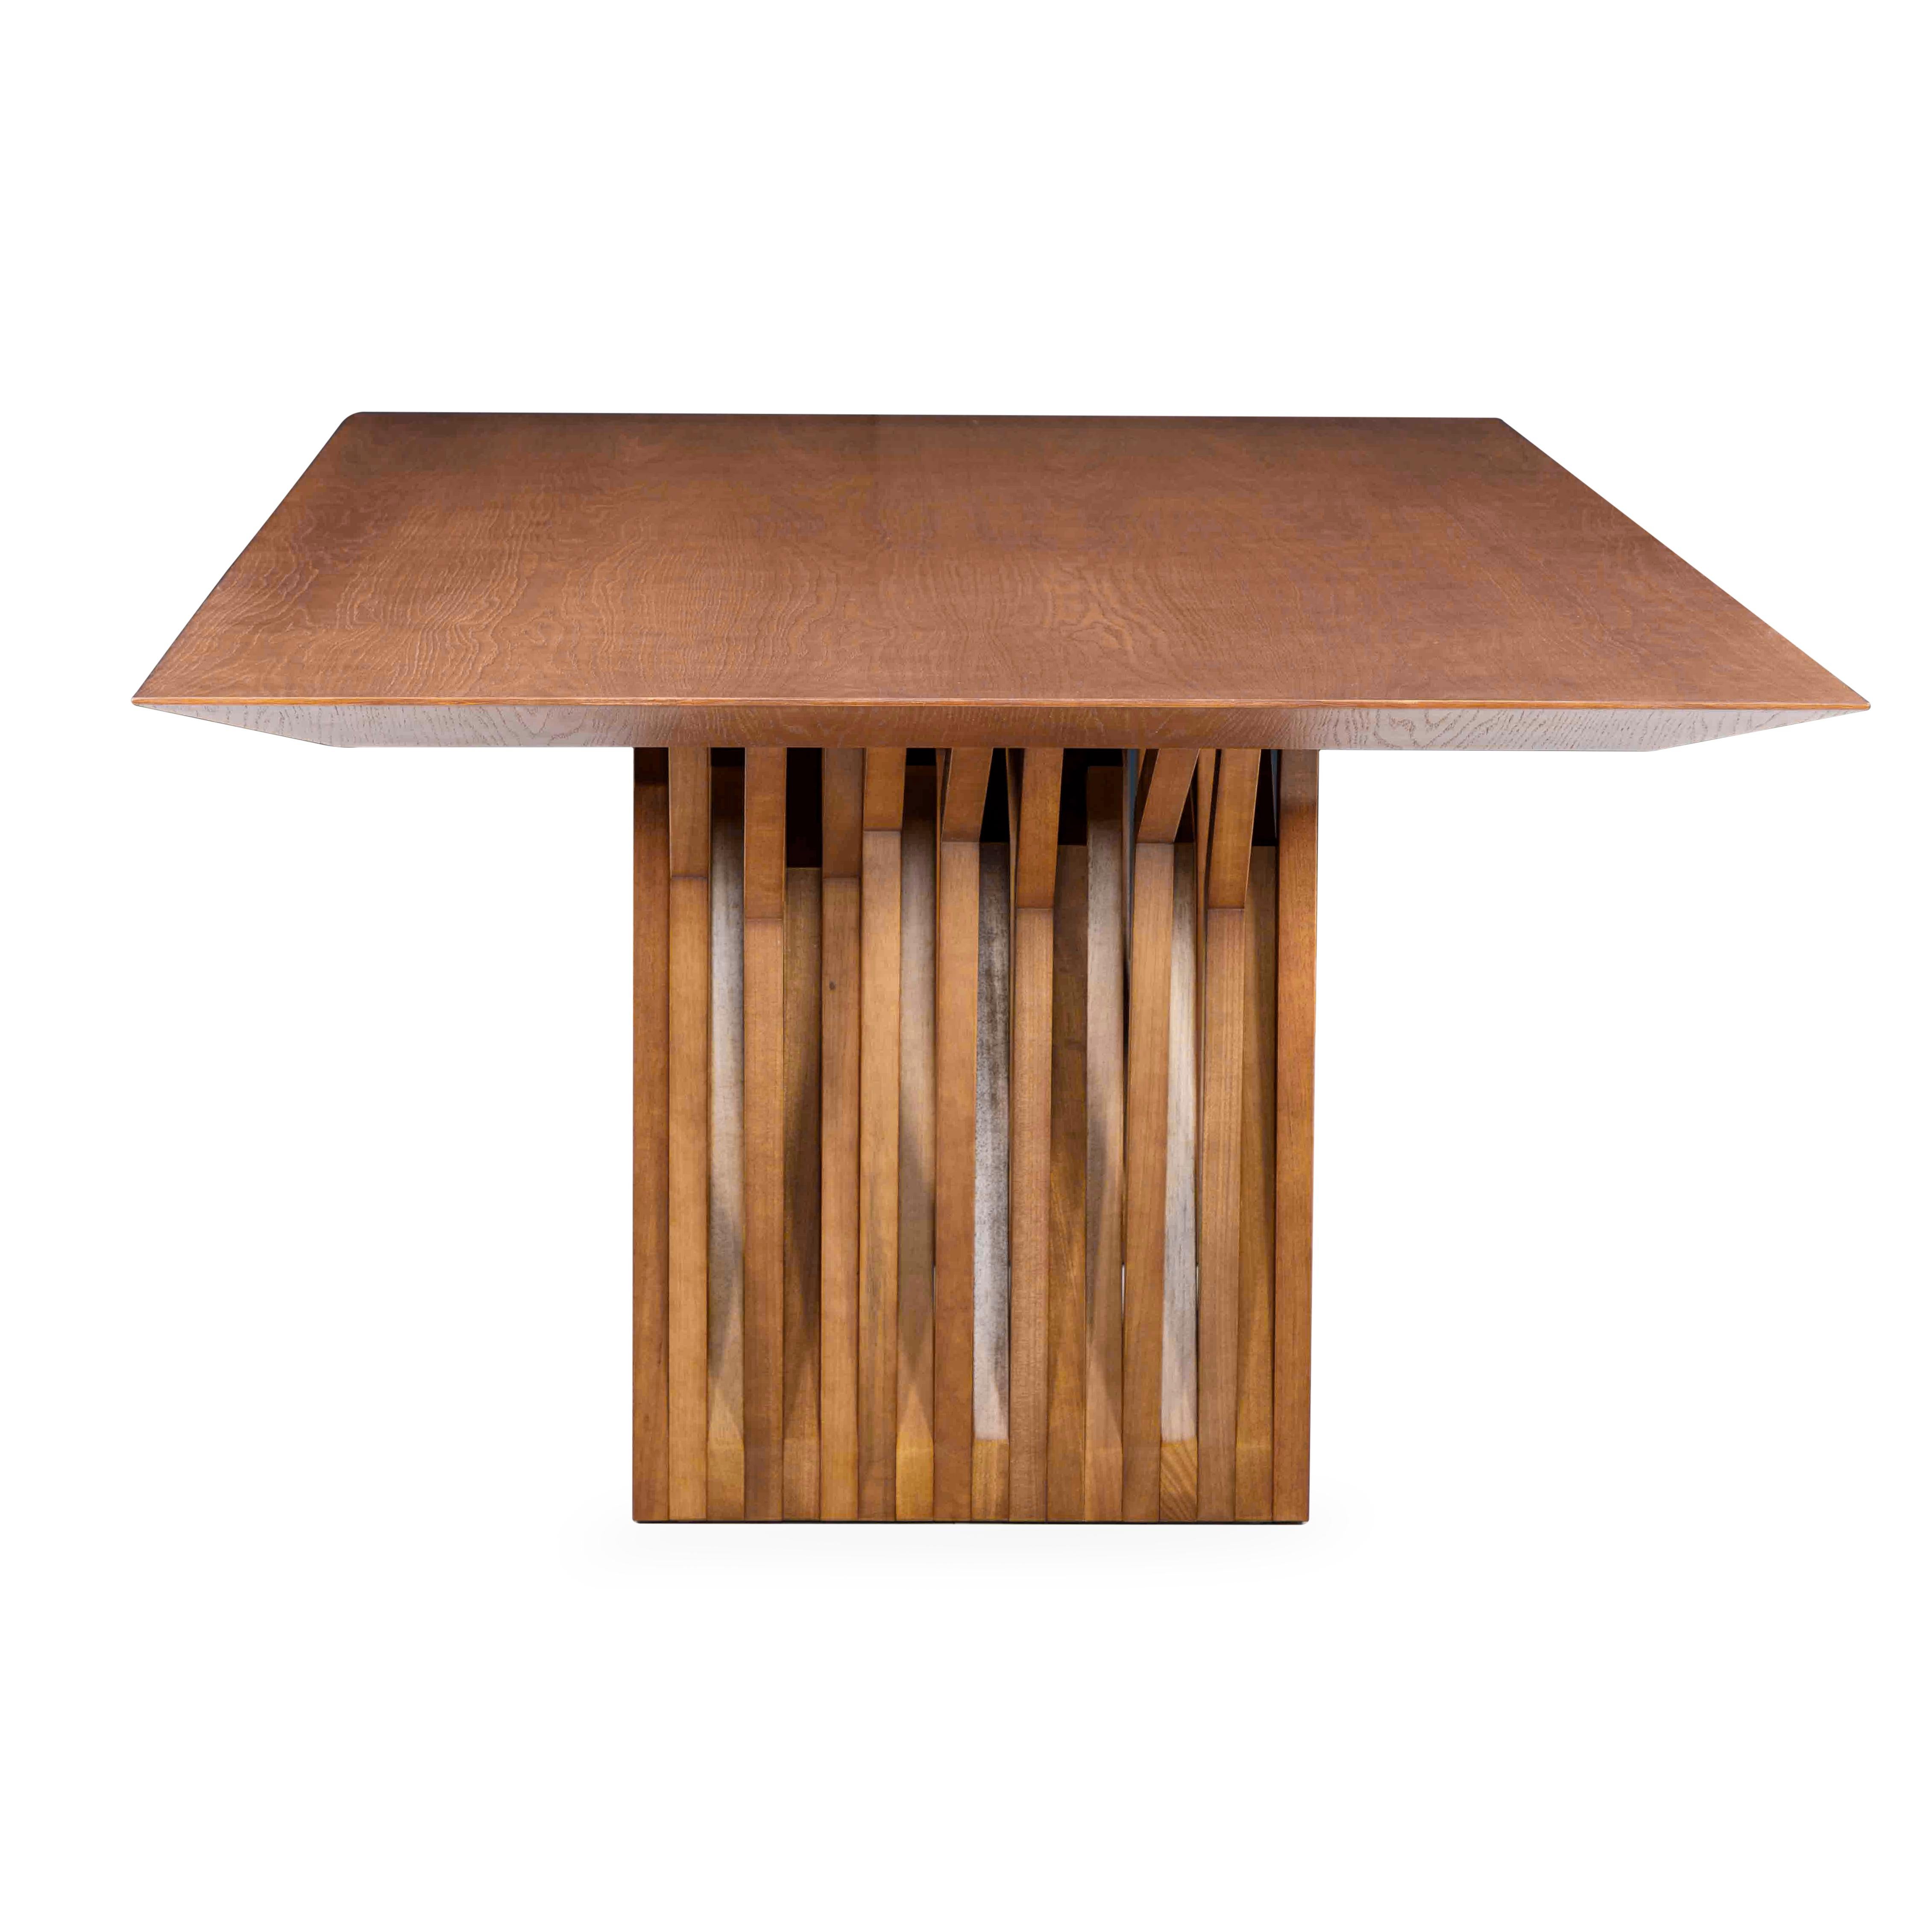 Radi Dining Table with Almond Oak Wood Veneered Table Top 98'' For Sale 1